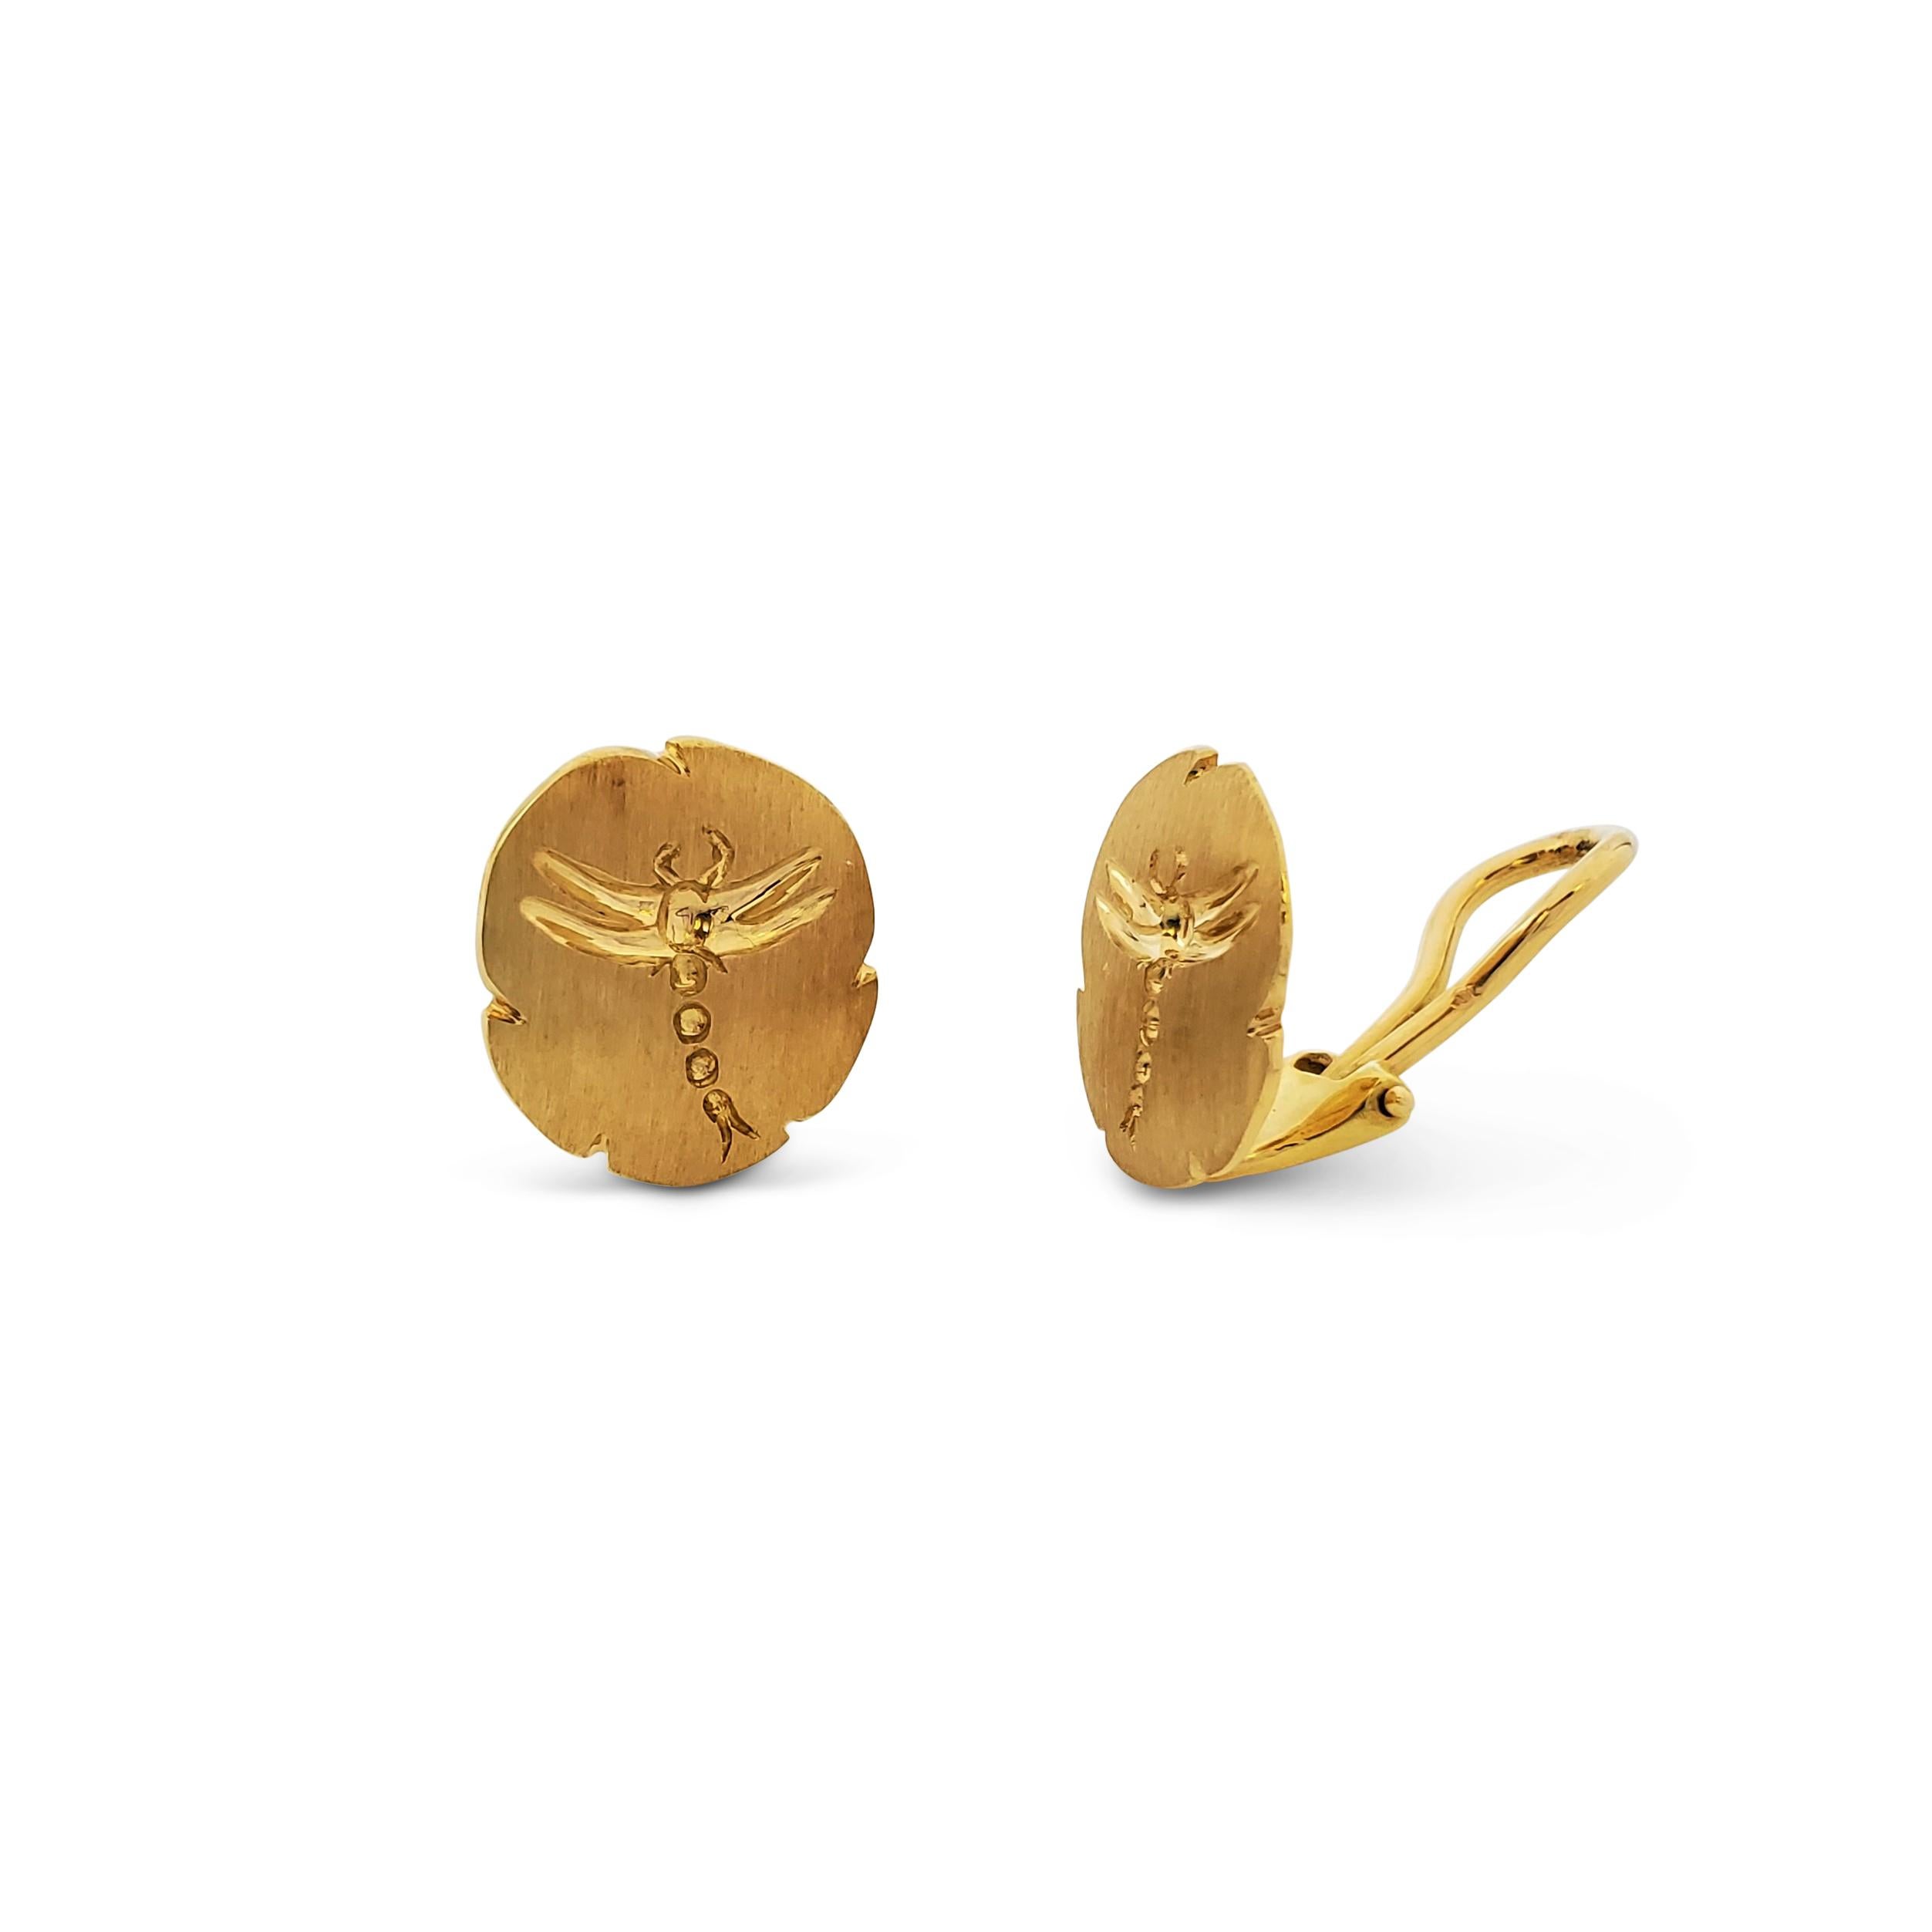 Authentic vintage Tiffany & Co. earrings crafted in 18 karat brushed satin-finished gold features an intricately carved dragonfly set in a solid gold lily pad. Signed T&Co., Italy, 750. Clip earrings without posts. The earrings are presented with